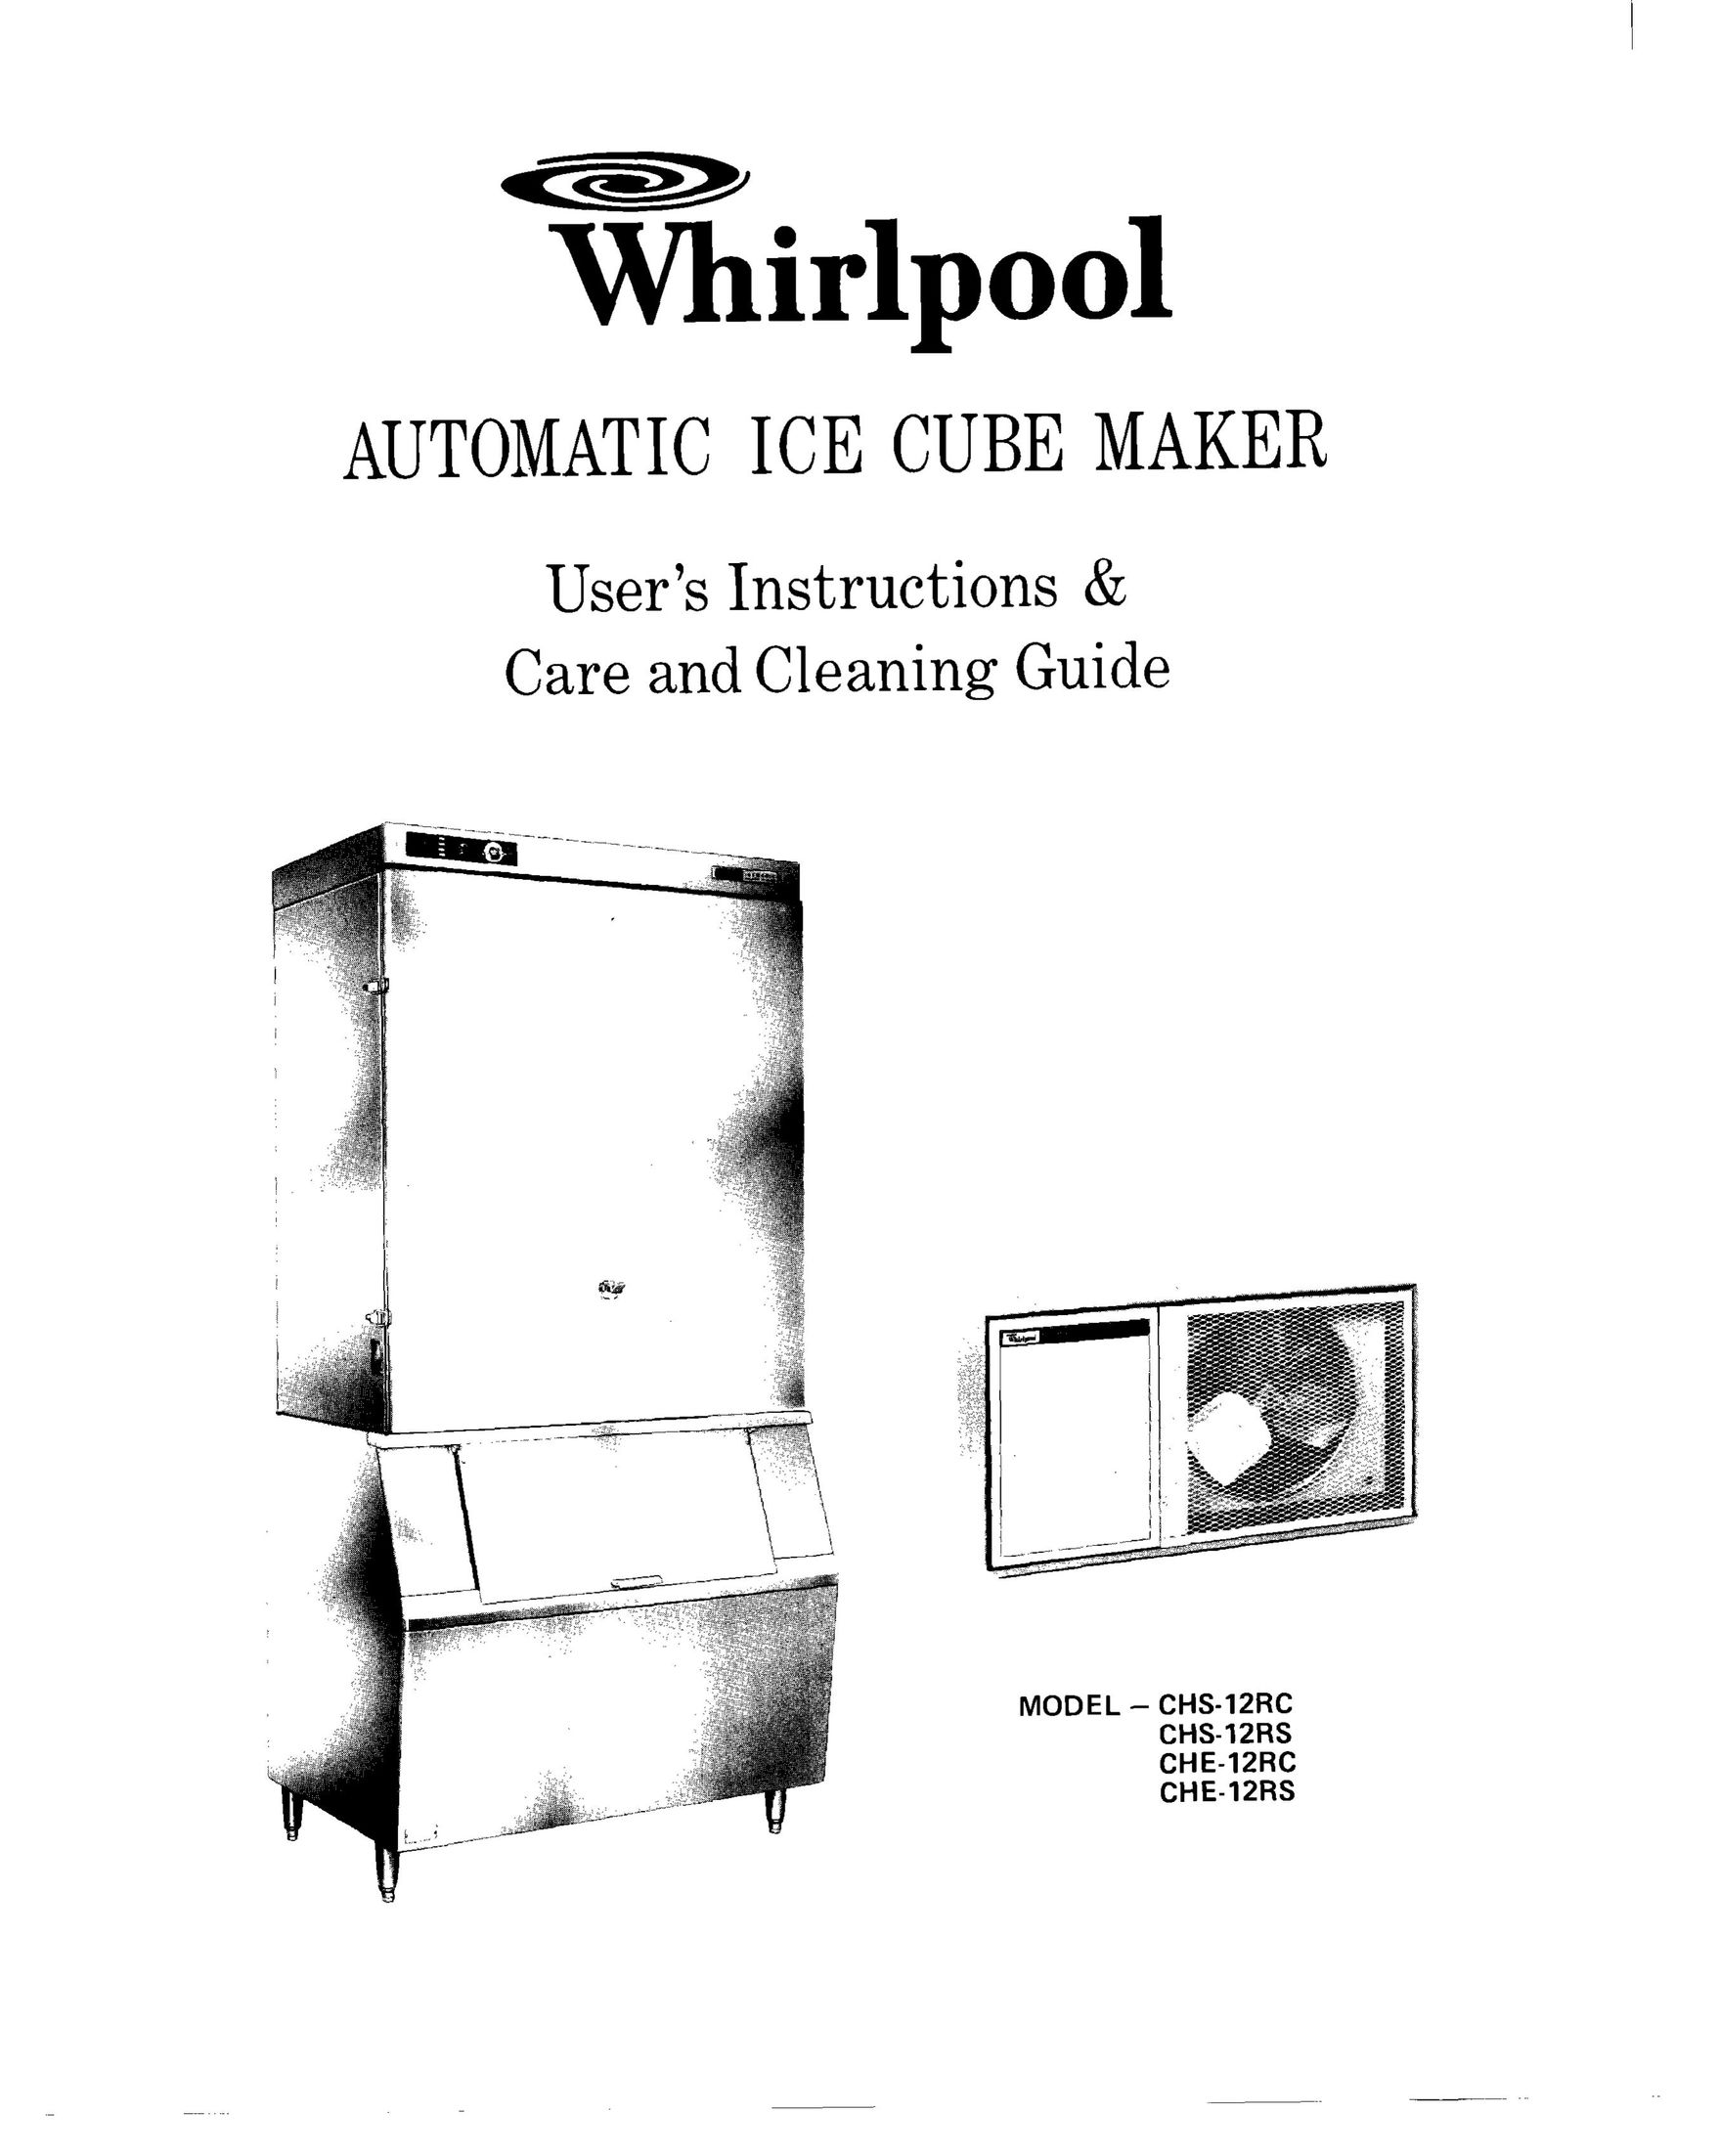 Whirlpool CHE-12RC Ice Maker User Manual